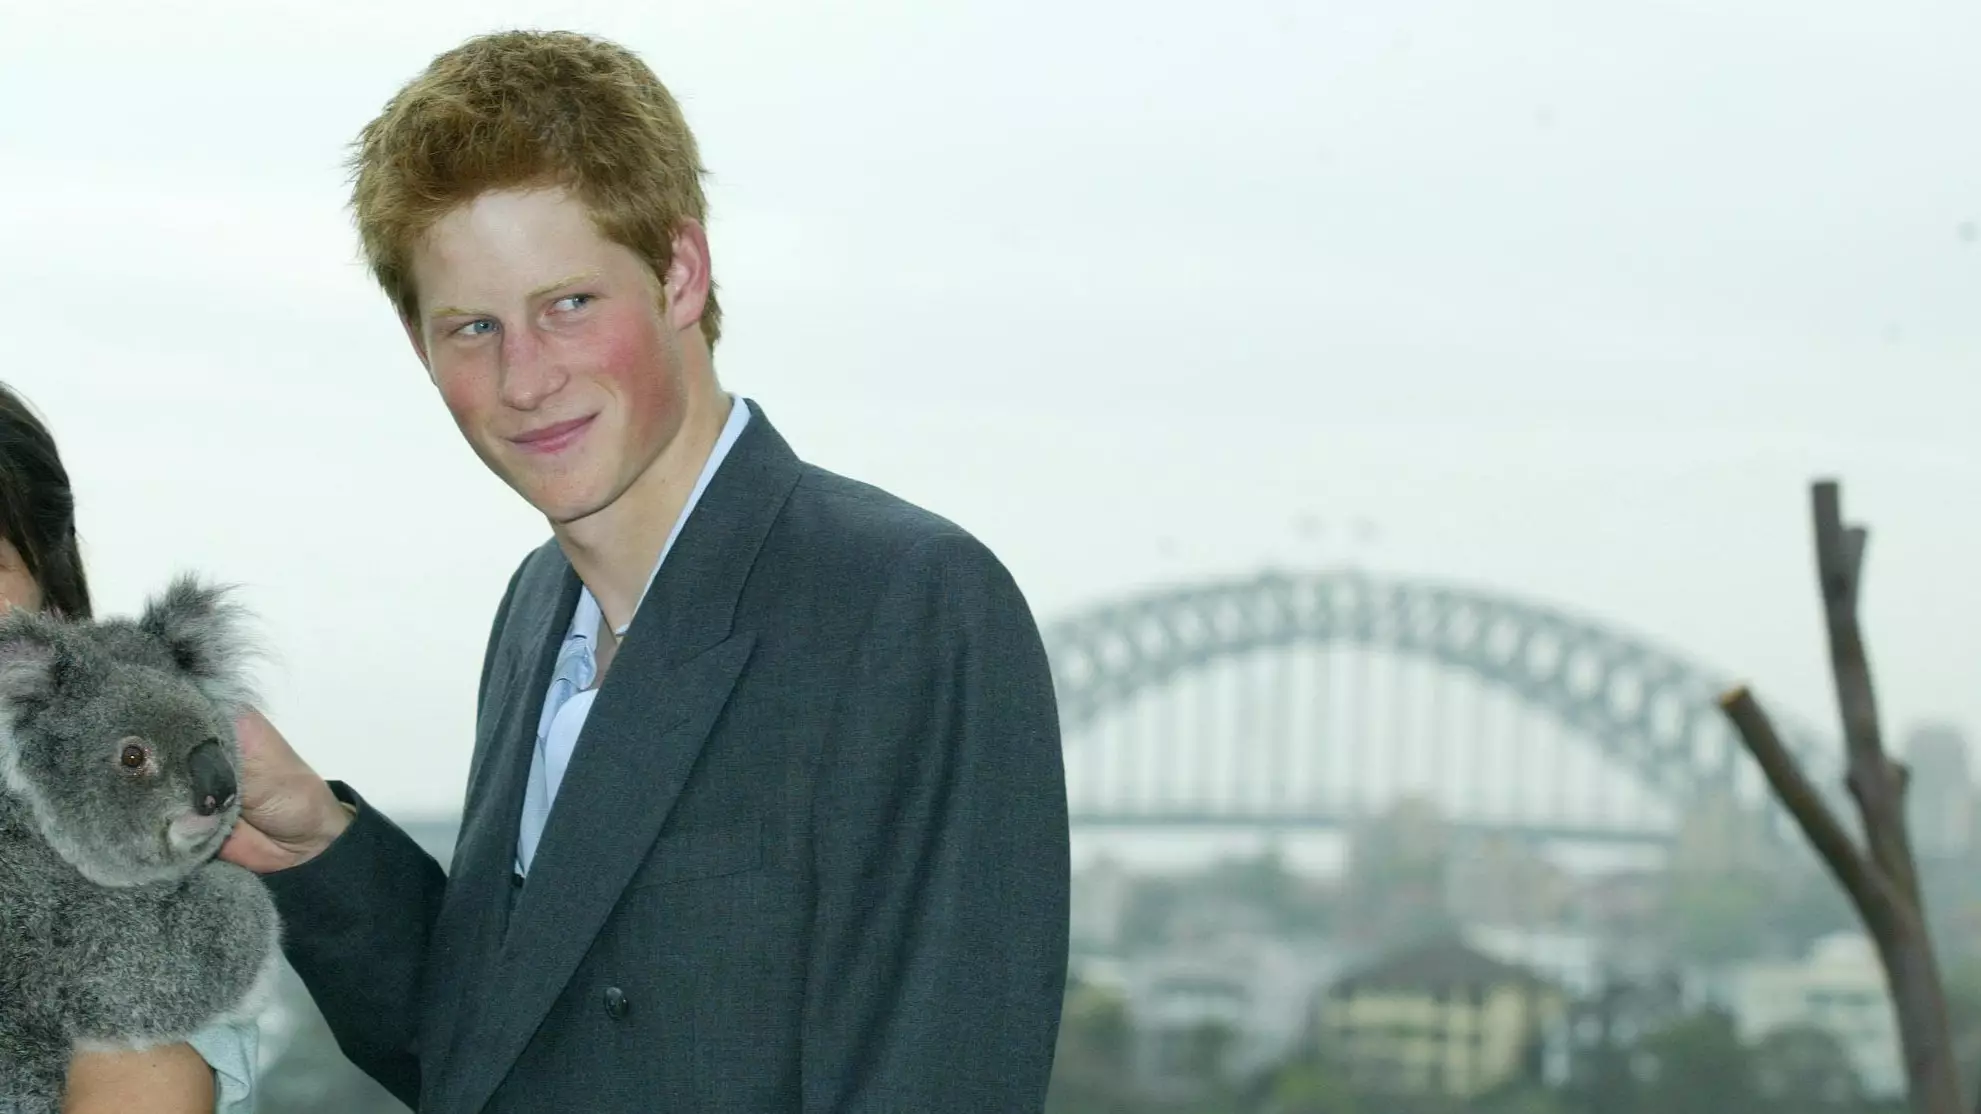 Aussie MP Has Invited Prince Harry To Have His Buck's Party On Our Shores